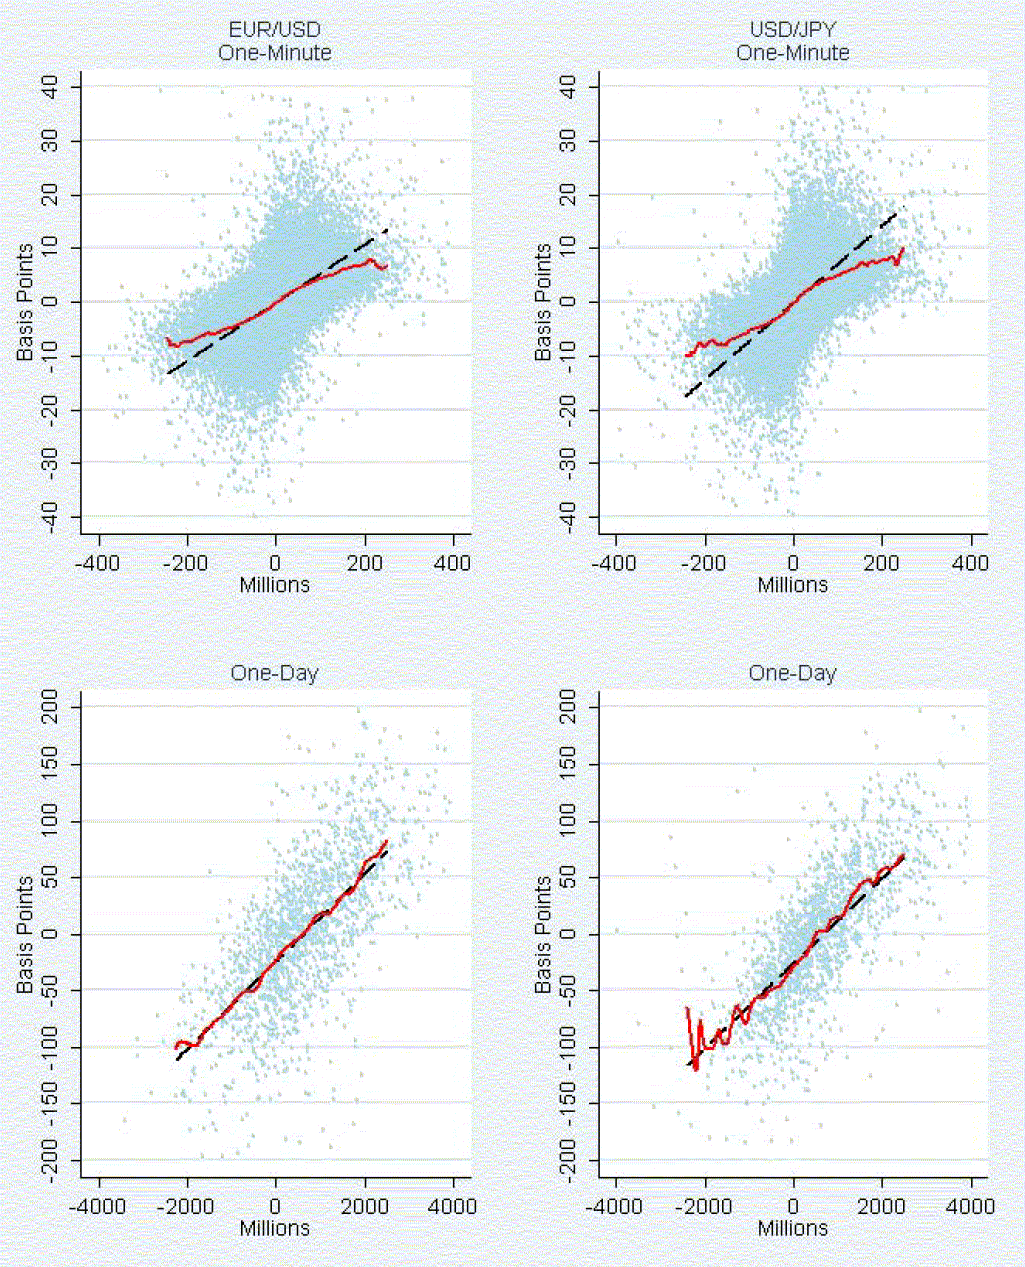 Figure 4 shows scatterplots of the returns and order flow in the euro-dollar and dollar-yen currency pairs at the one-minute and one-day frequencies, along with fitted lines from the OLS regressions and non-parametric estimates of the relationship derived using the Nadaraya-Watson estimator. The scatterplots clearly show the systematic positive relation obtained in the linear regressions, and it is obvious that the relations at the one minute and one day frequencies are not the result of a small number of outliers.  However, at the one-minute frequency, the scatterplots do suggest some nonlinearity in the association, and this is confirmed by the non-parametric estimation. At this very high frequency, the nature of the nonlinearity is that large order flow imbalances, both positive and negative, have a smaller incremental effect on the exchange rate.